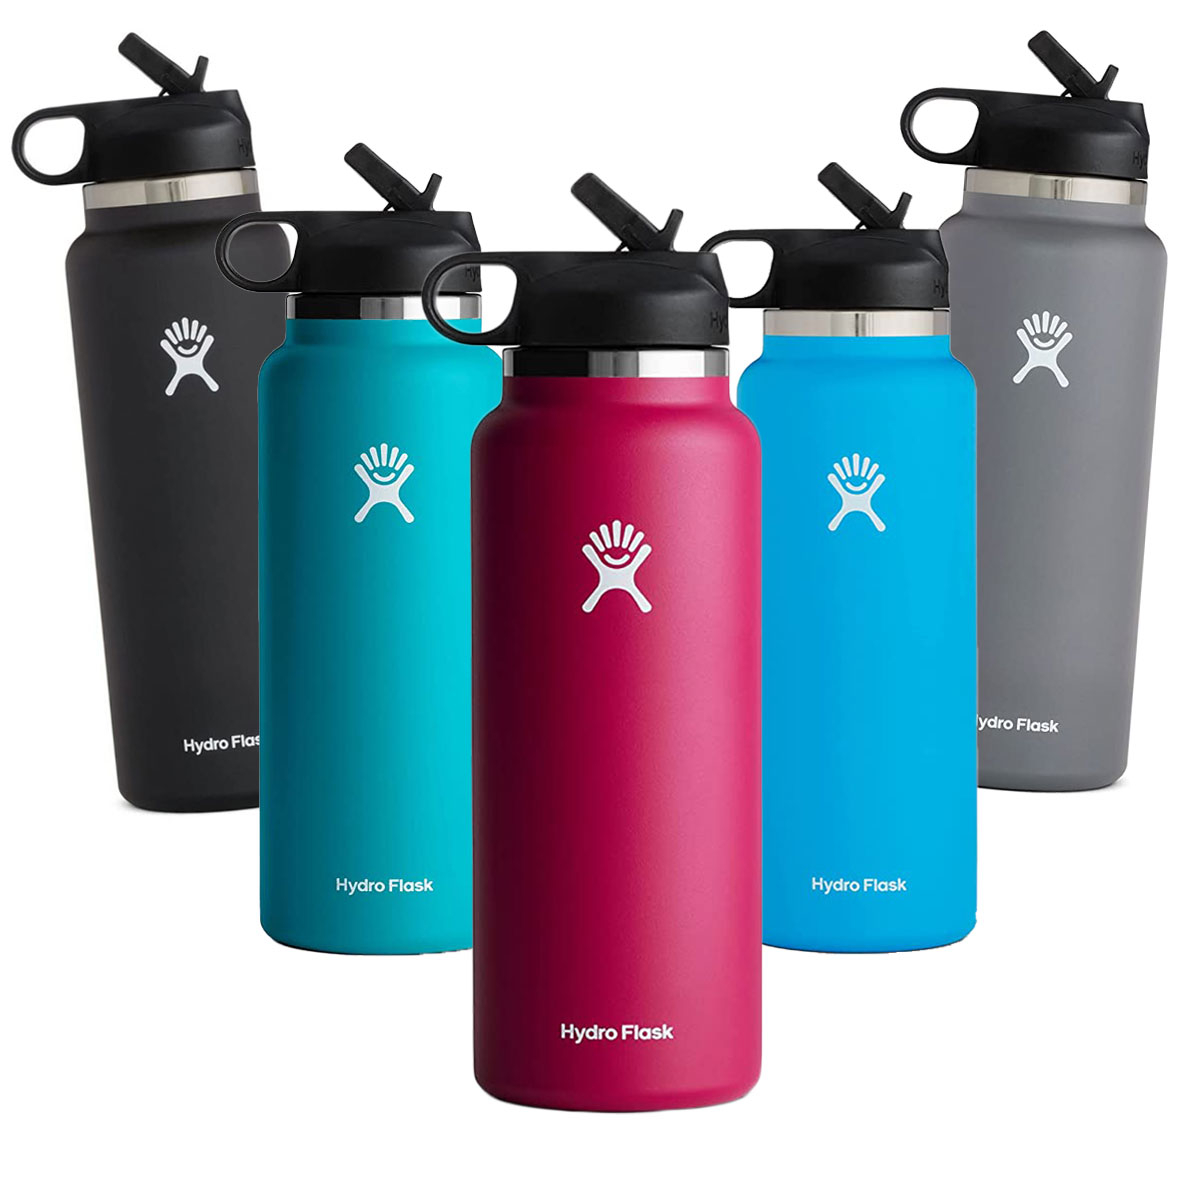 https://akns-images.eonline.com/eol_images/Entire_Site/2022912/rs_1200x1200-221012061402-1200-Hydroflask-KD-101222.jpg?fit=around%7C1080:540&output-quality=90&crop=1080:540;center,top